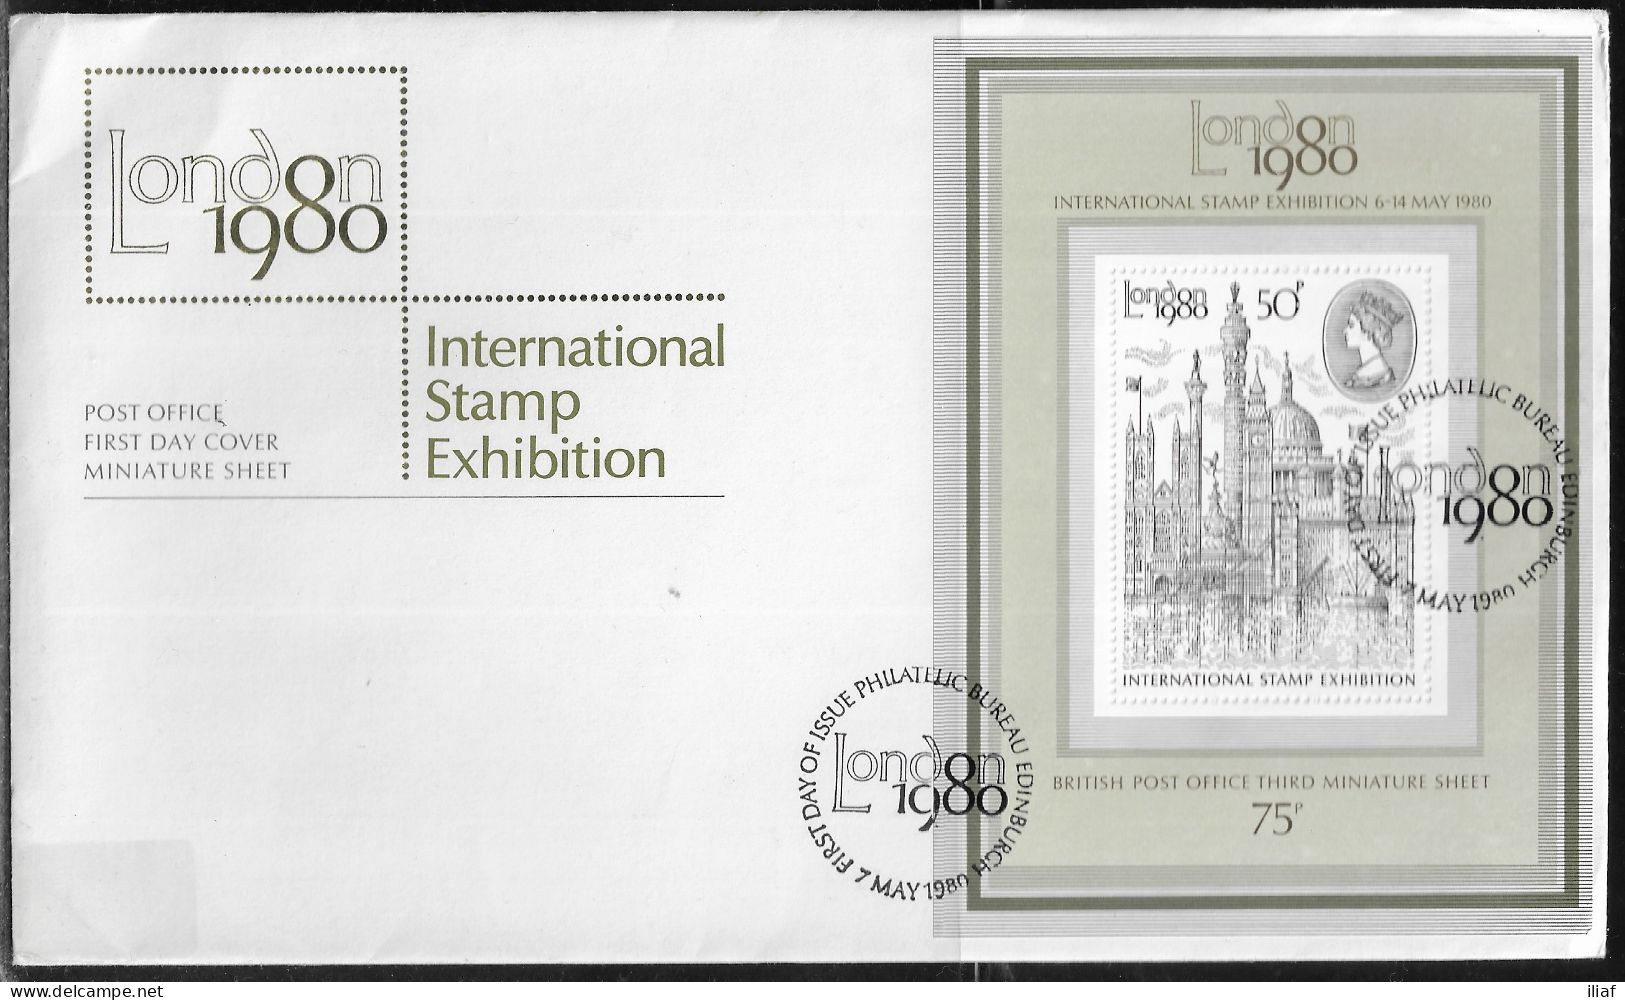 United Kingdom Of Great Britain.  FDC Sc. 909a. Souvenir Sheet.  International Stamp Exhibition 'London 1980'.  FDC Canc - 1971-1980 Decimal Issues